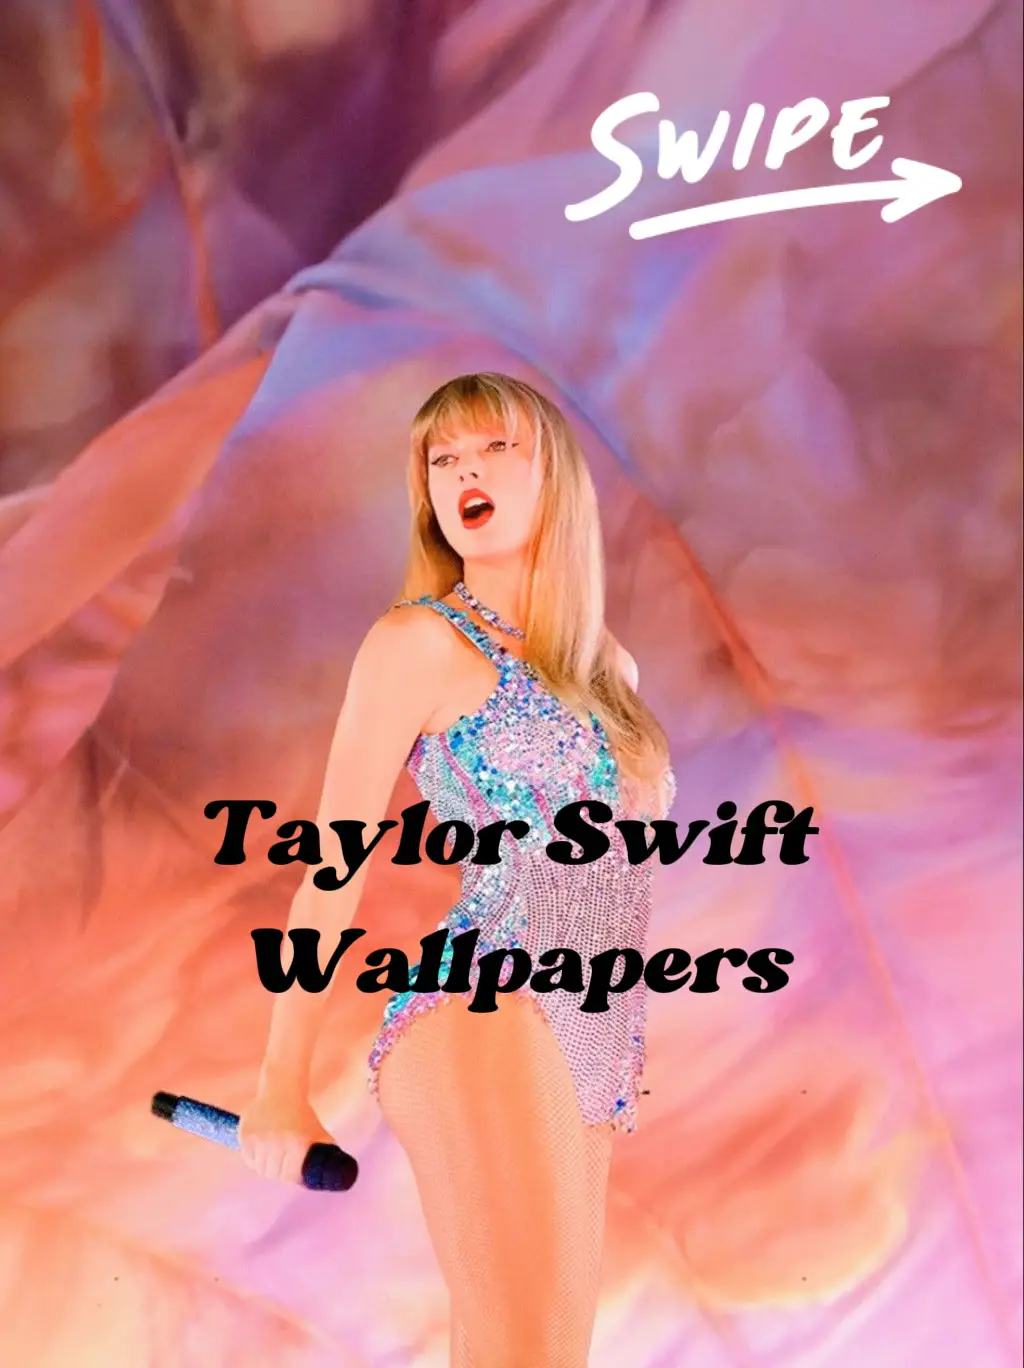 Taylor Swift Wallpapers Gallery posted by SwiftieCentral Lemon8